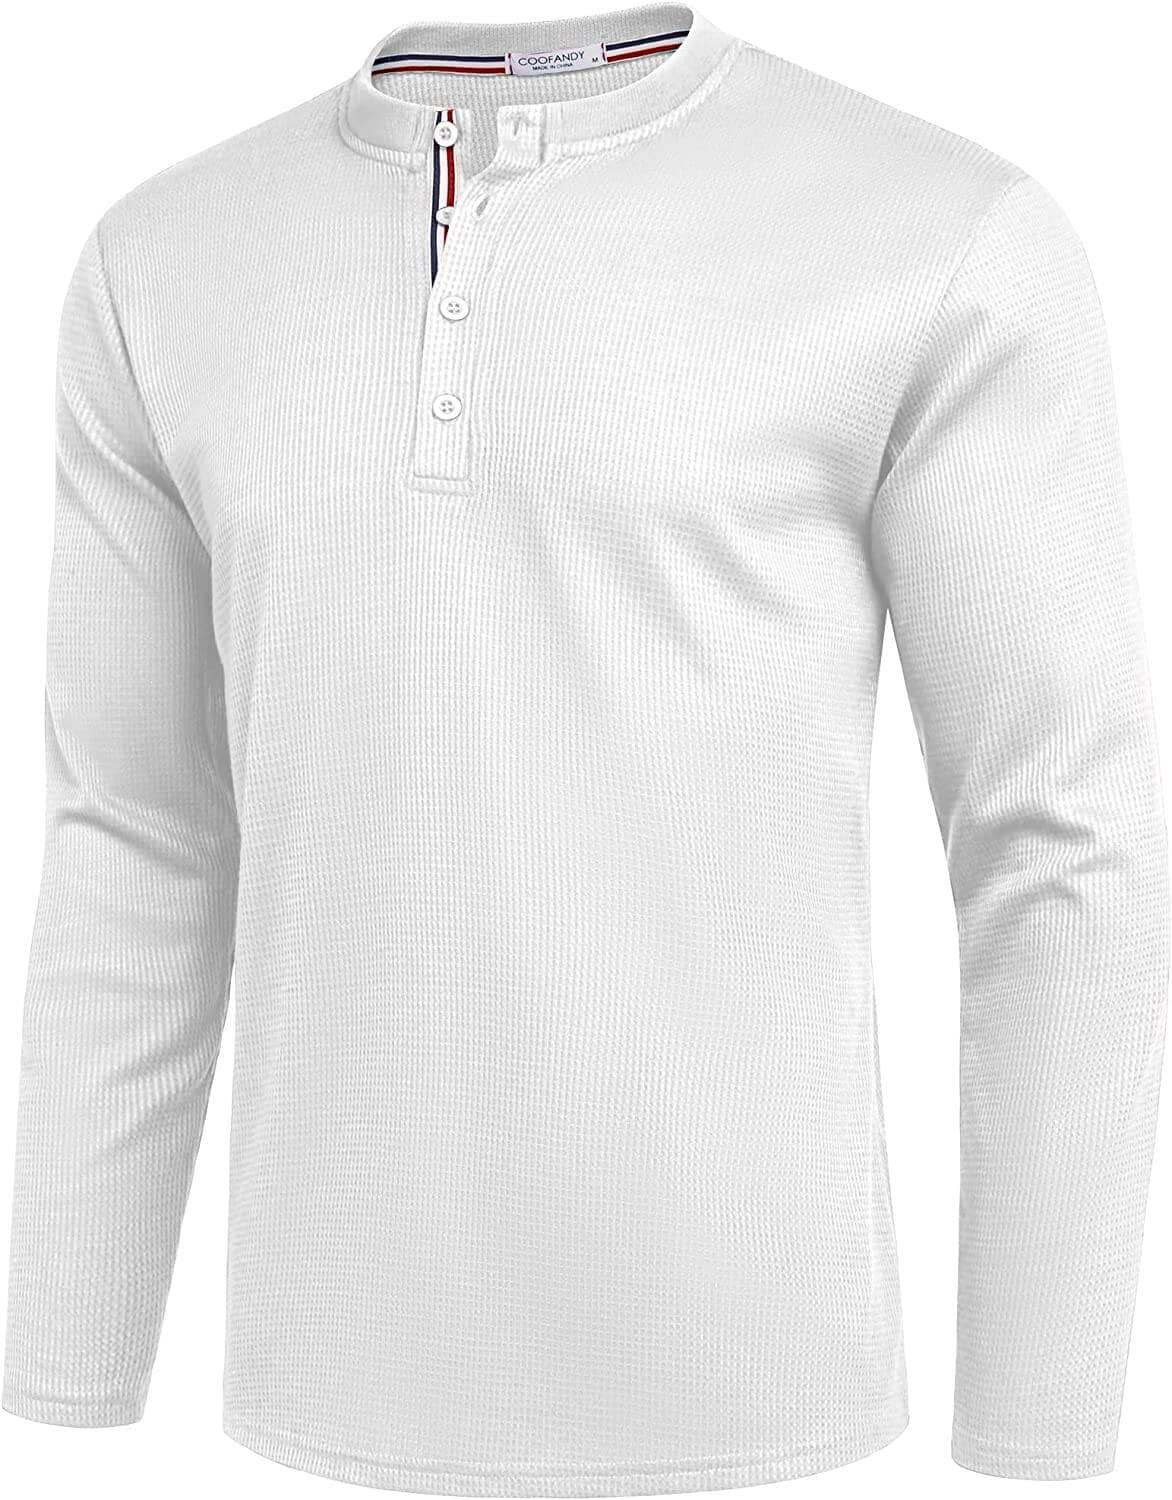 Long Sleeve Waffle Henley Shirts (US Only) T-Shirt Coofandy's White S 